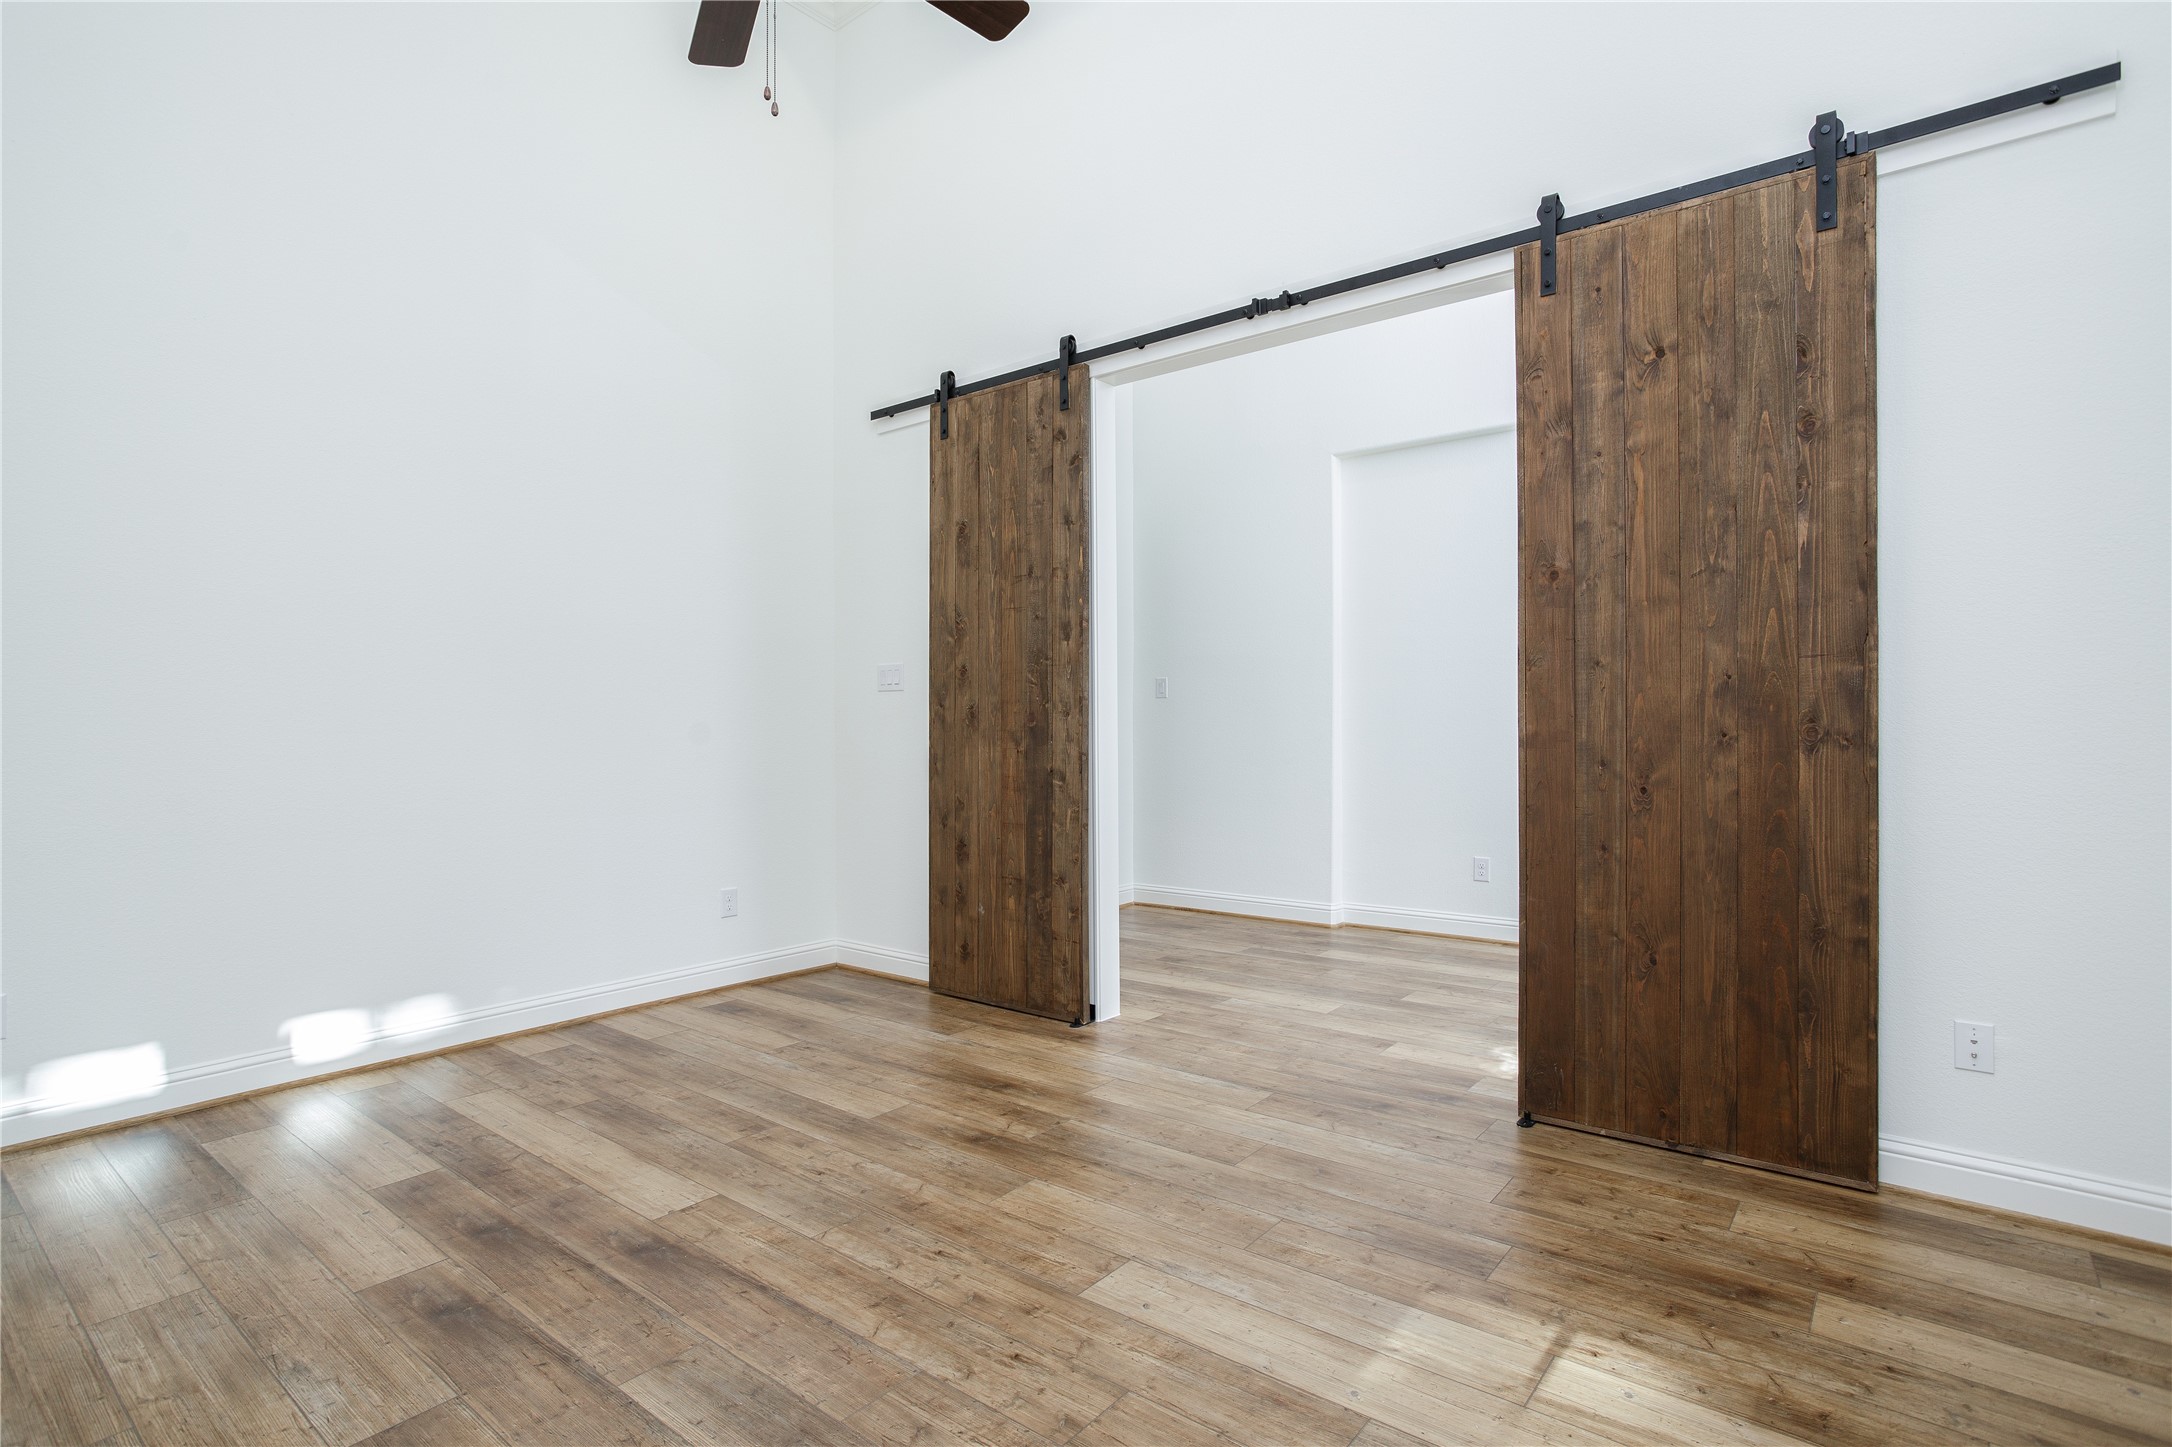 Double barn style door entrance to home office/study.